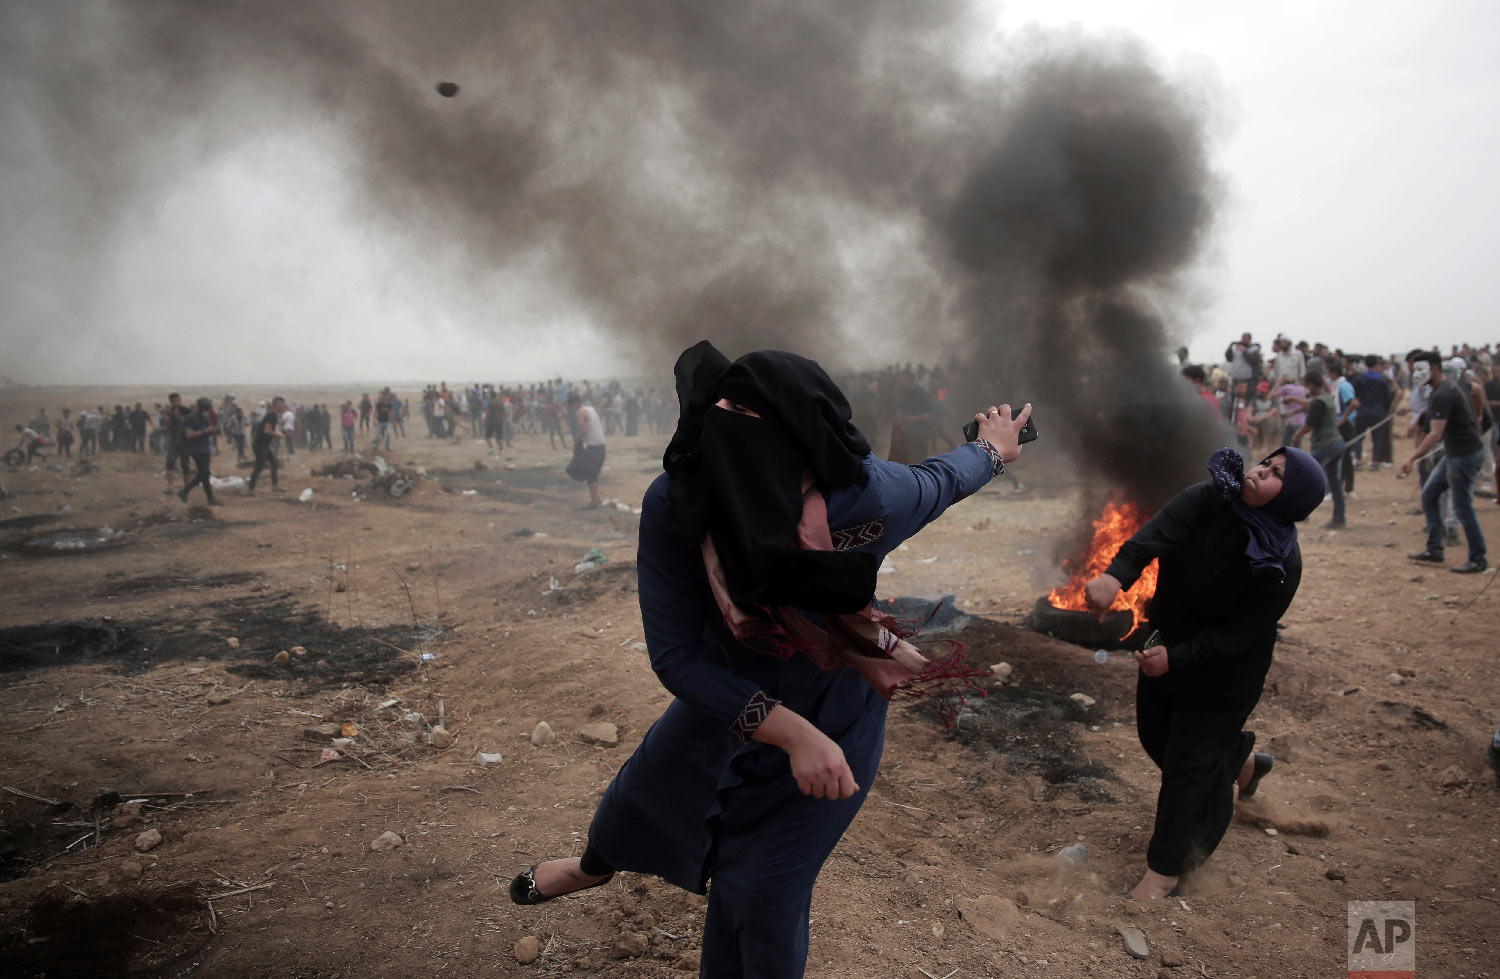  Palestinian women hurl stones at Israeli troops during a protest at the Gaza Strip's border with Israel on May 4, 2018. (AP Photo/ Khalil Hamra) 